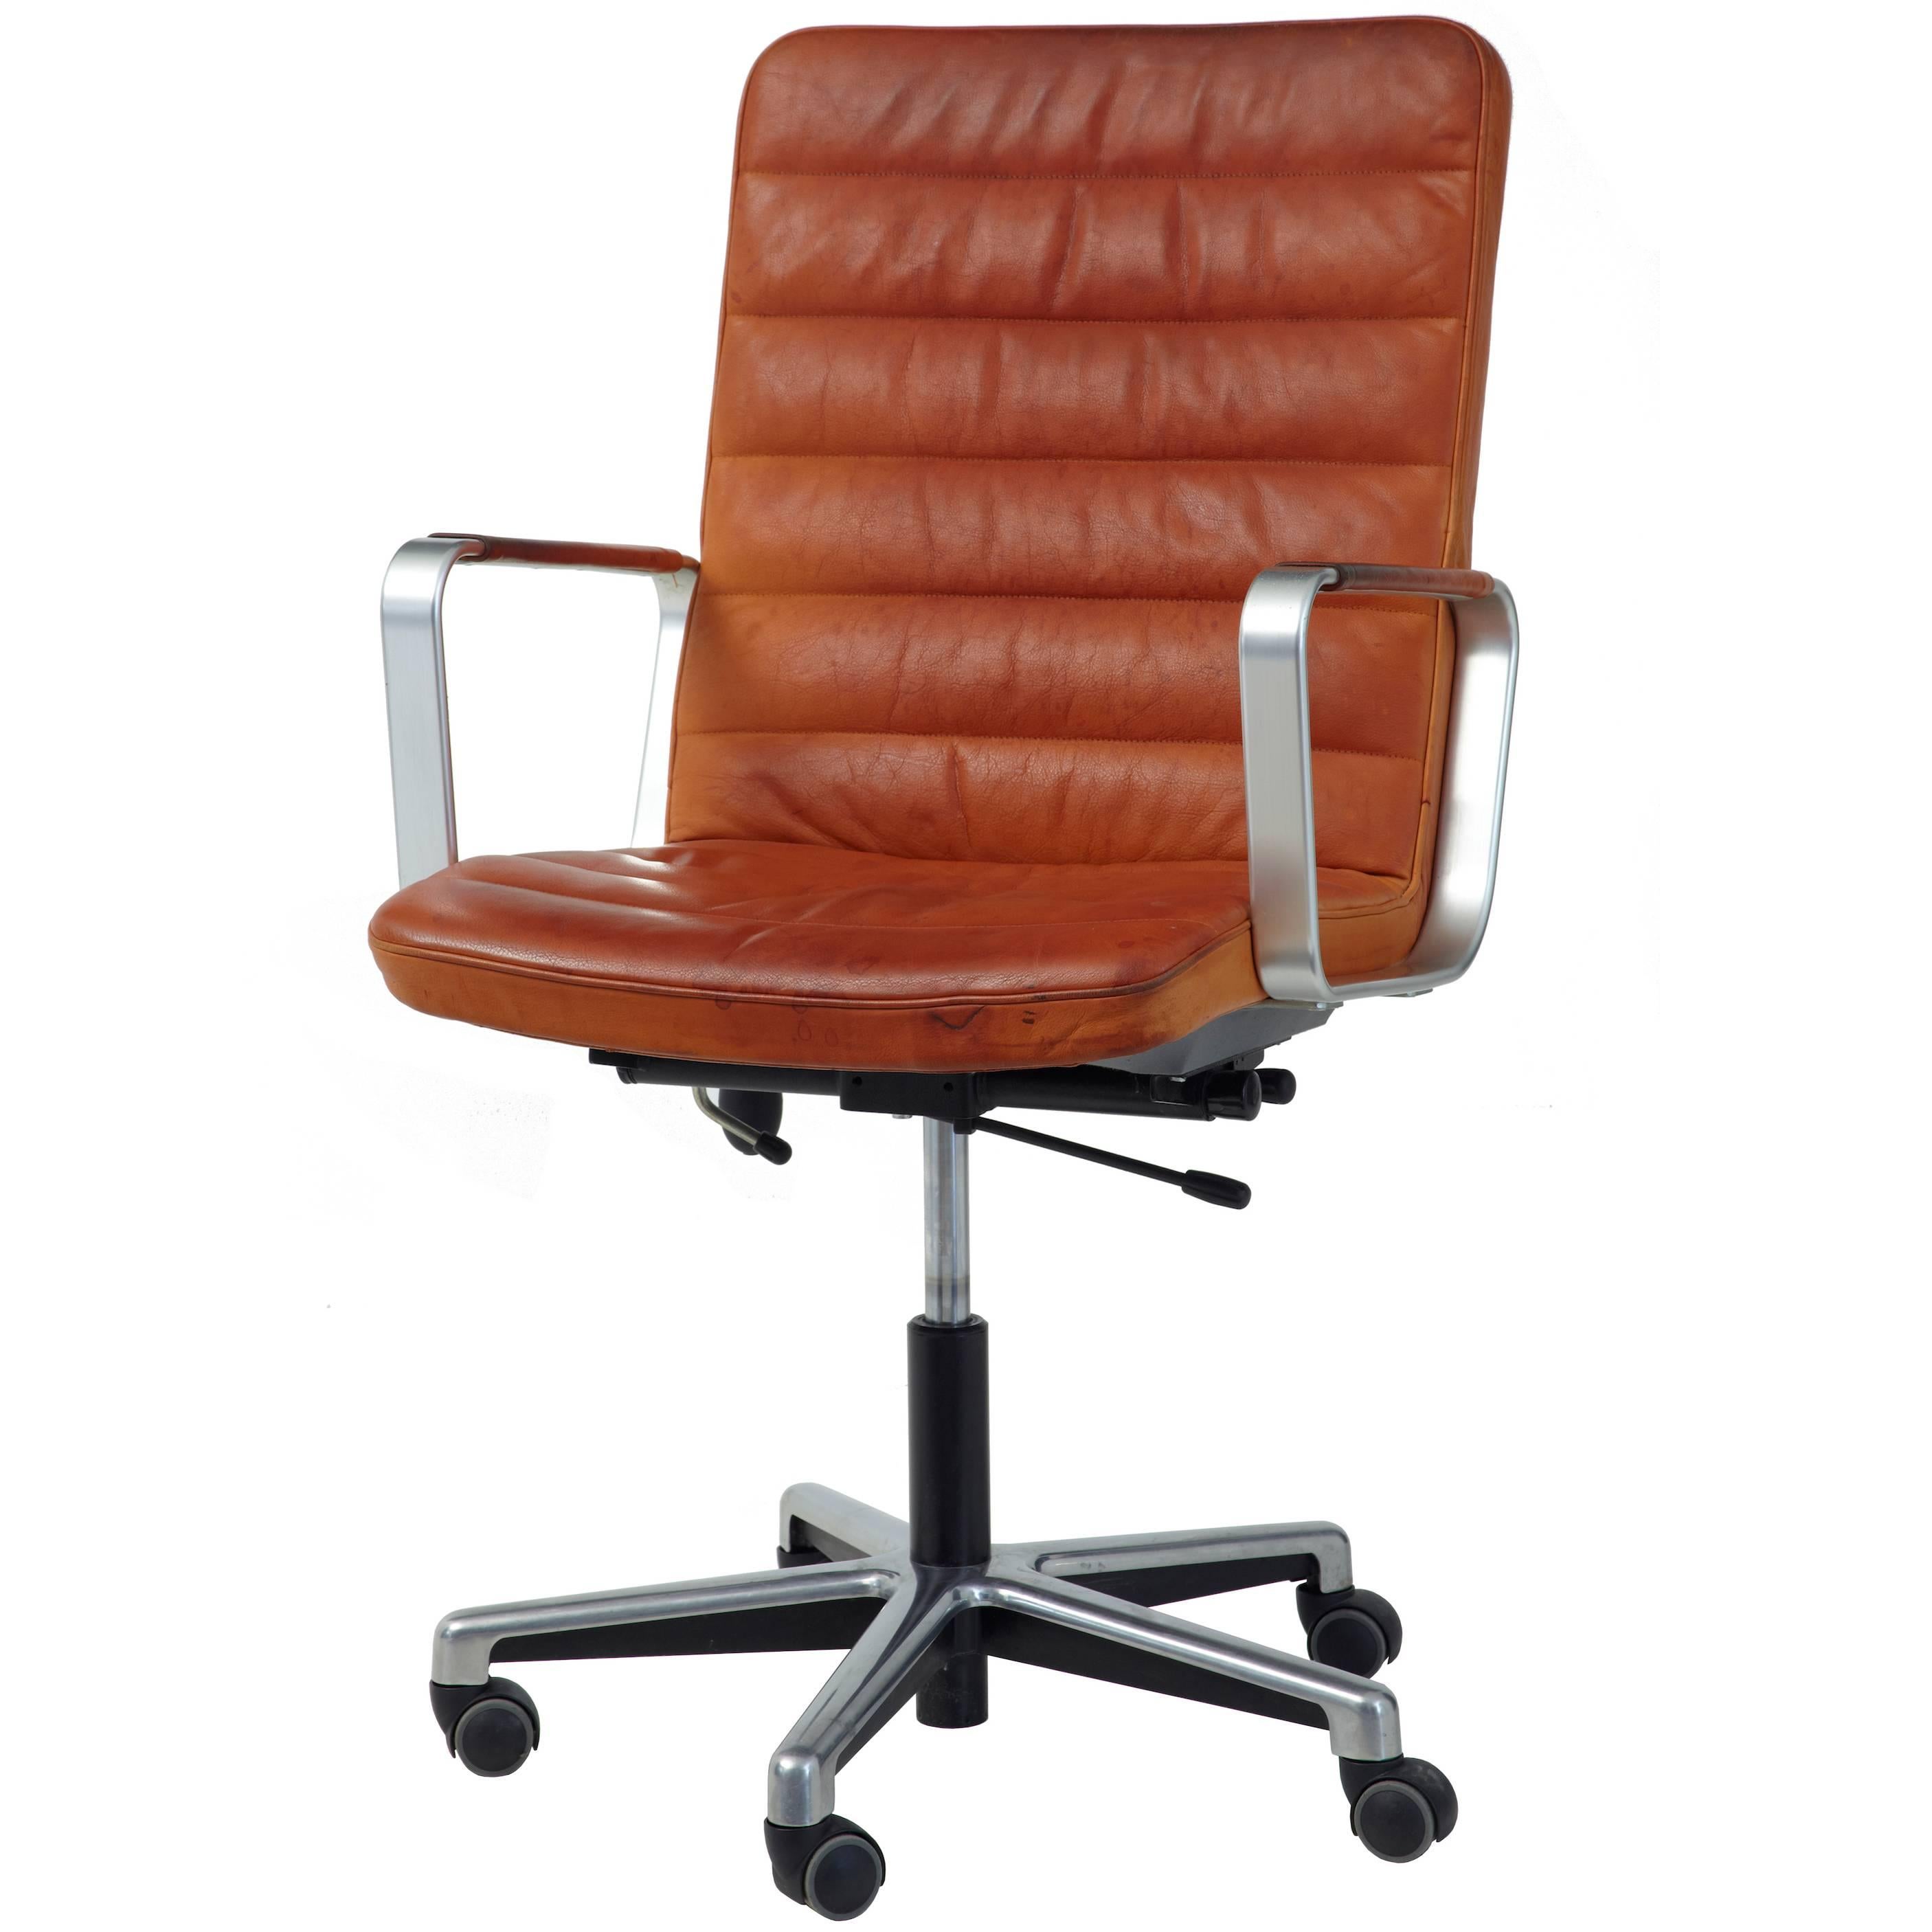 20th Century Scandinavian Modern Leather and Chrome Office Chair by Joc